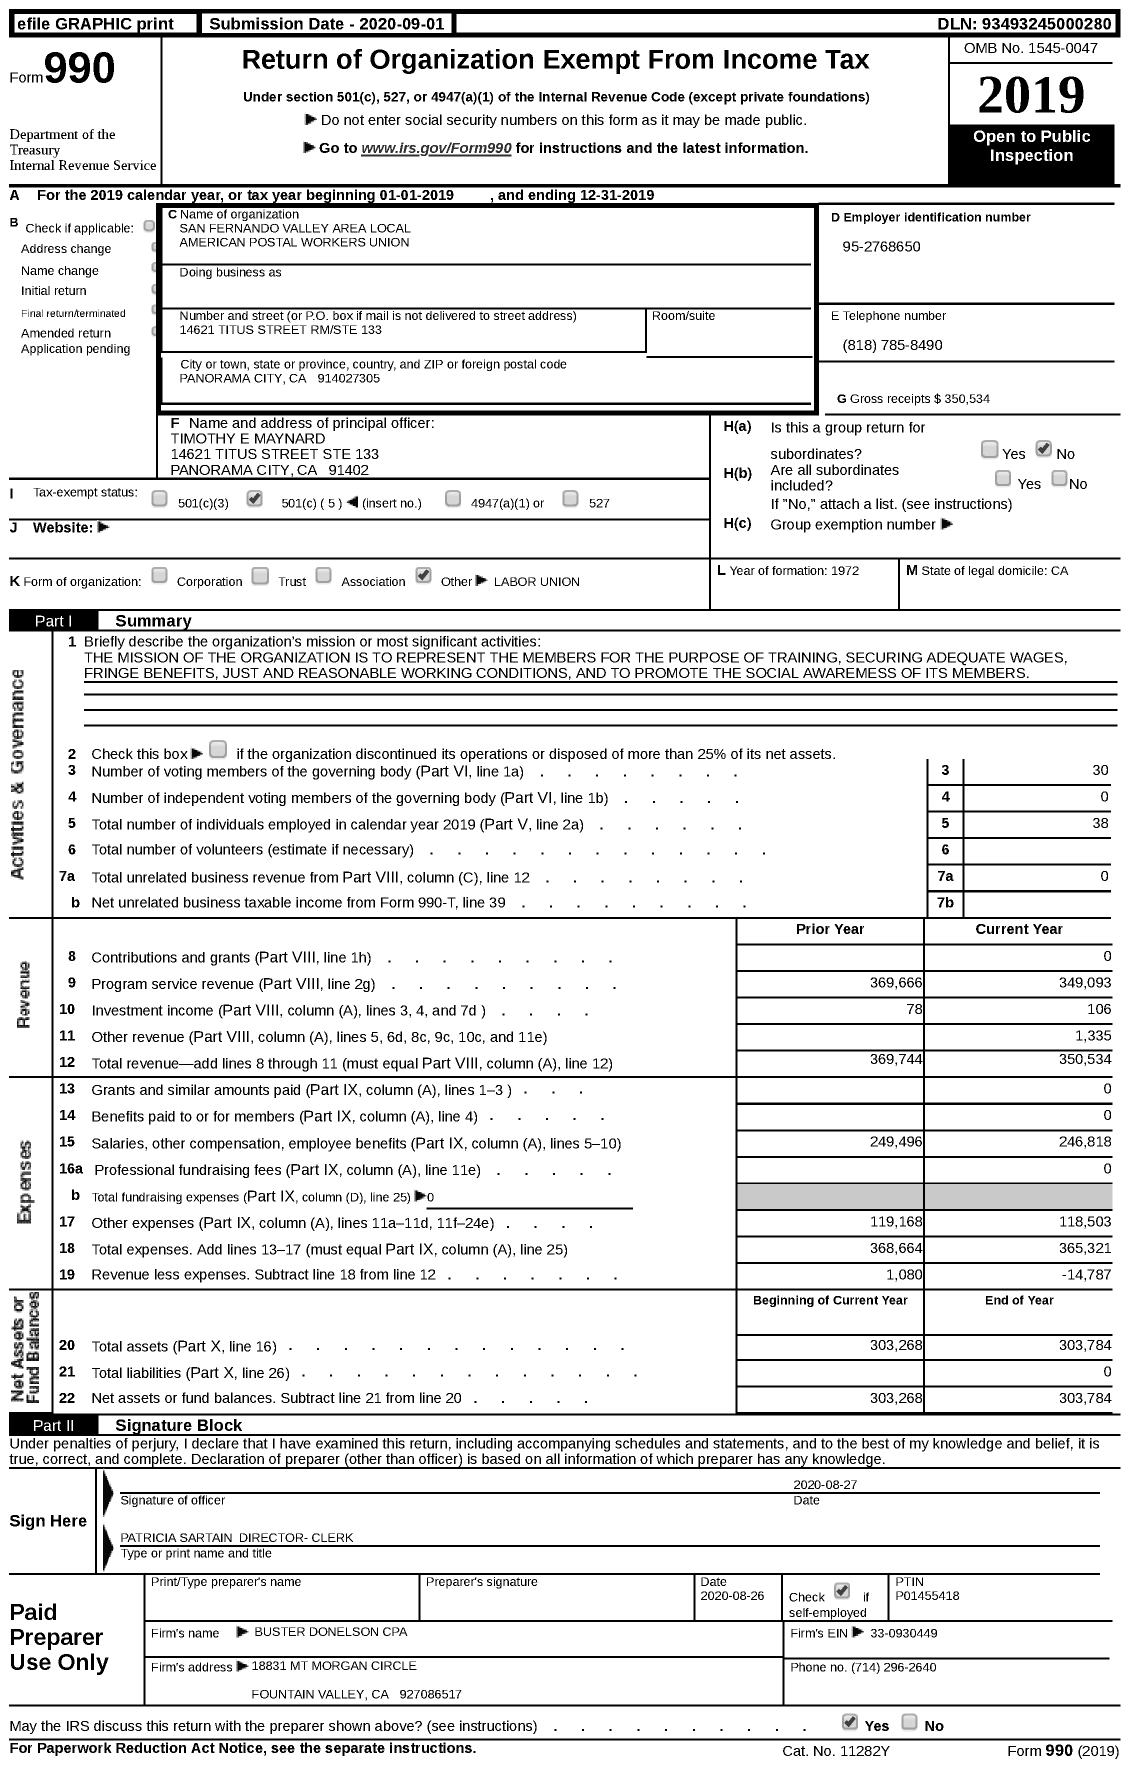 Image of first page of 2019 Form 990 for San Fernando Valley Area Local American Postal Workers Union